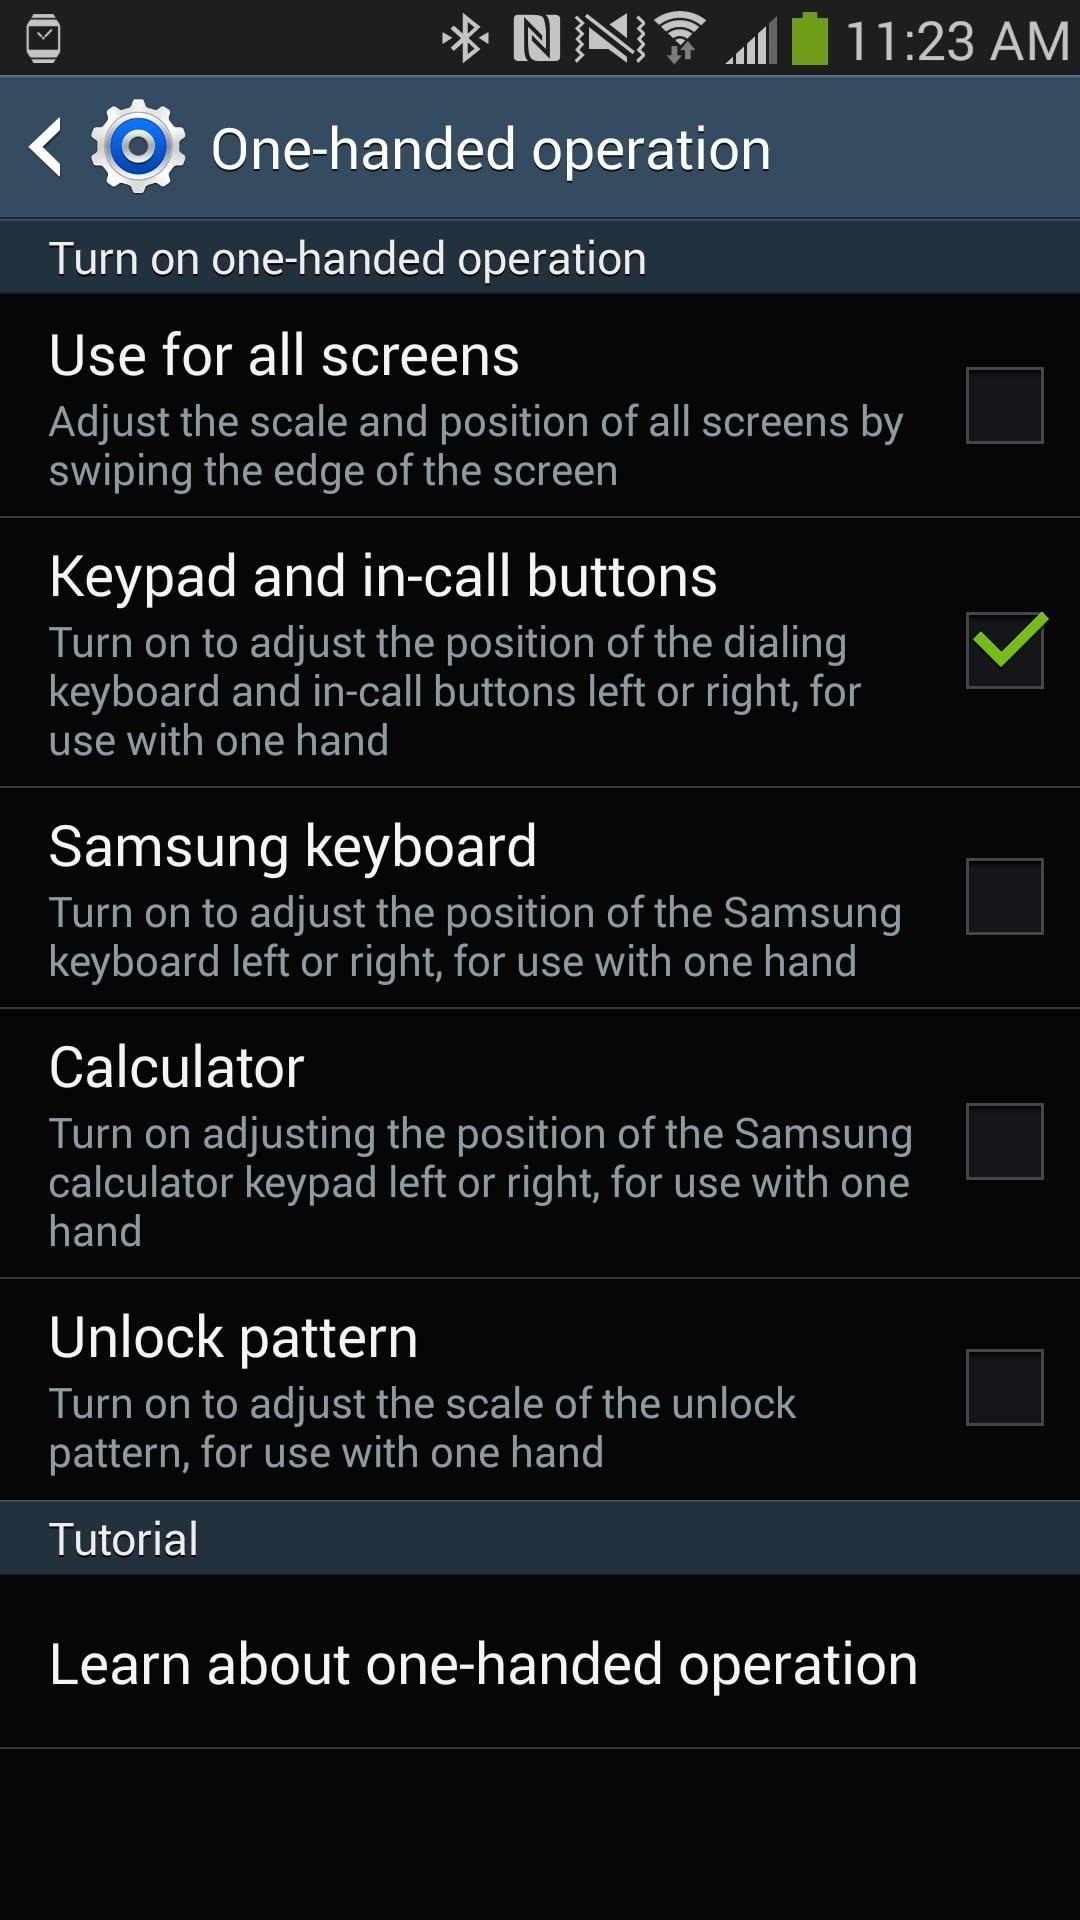 How to Make the Huge Samsung Galaxy Note 3 Easier to Use with Your One Tiny Little Hand